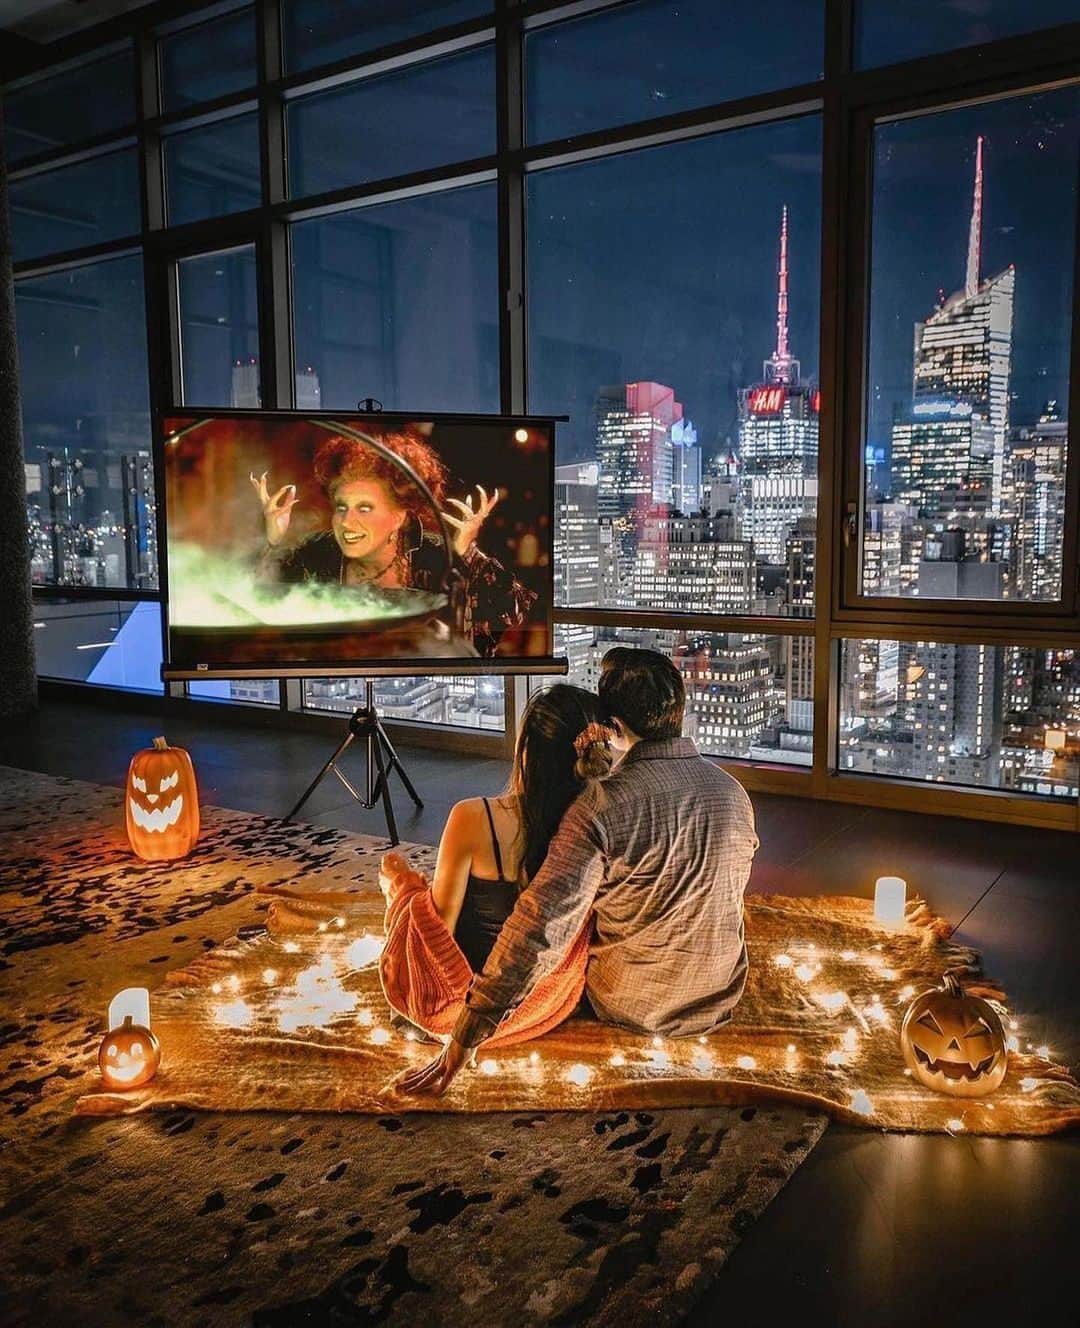 PicLab™ Sayingsのインスタグラム：「Tonight’s agenda.. candy corn, caramel popcorn, and binging our favorite Halloween movies of course! 🍿 If you could teleport to any one of these which one would you choose and what Halloween movie would you watch?   Photo 1 by @tourdelust  Photo 2 DM for credit  Photo 3 and 4 by @cfunk44」